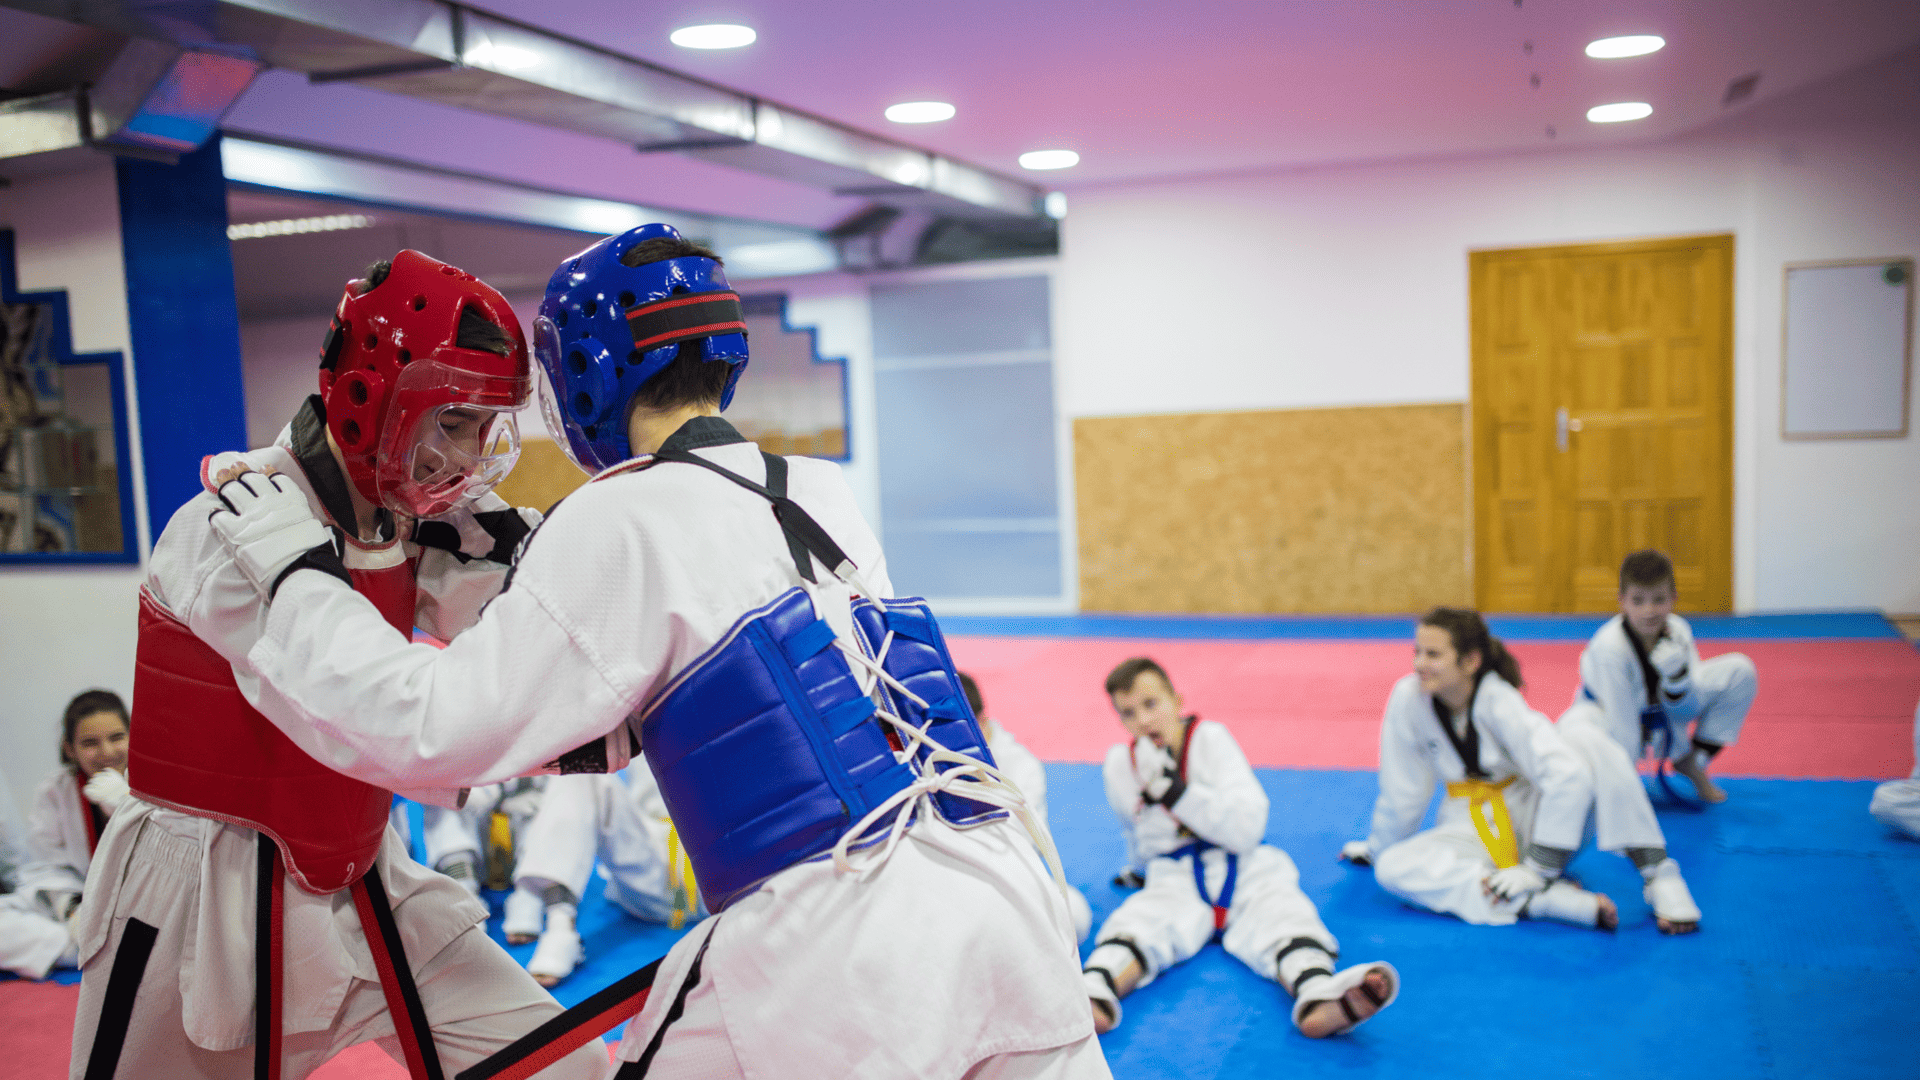 How Can Martial Arts Club Owners Better Manage Their Time?